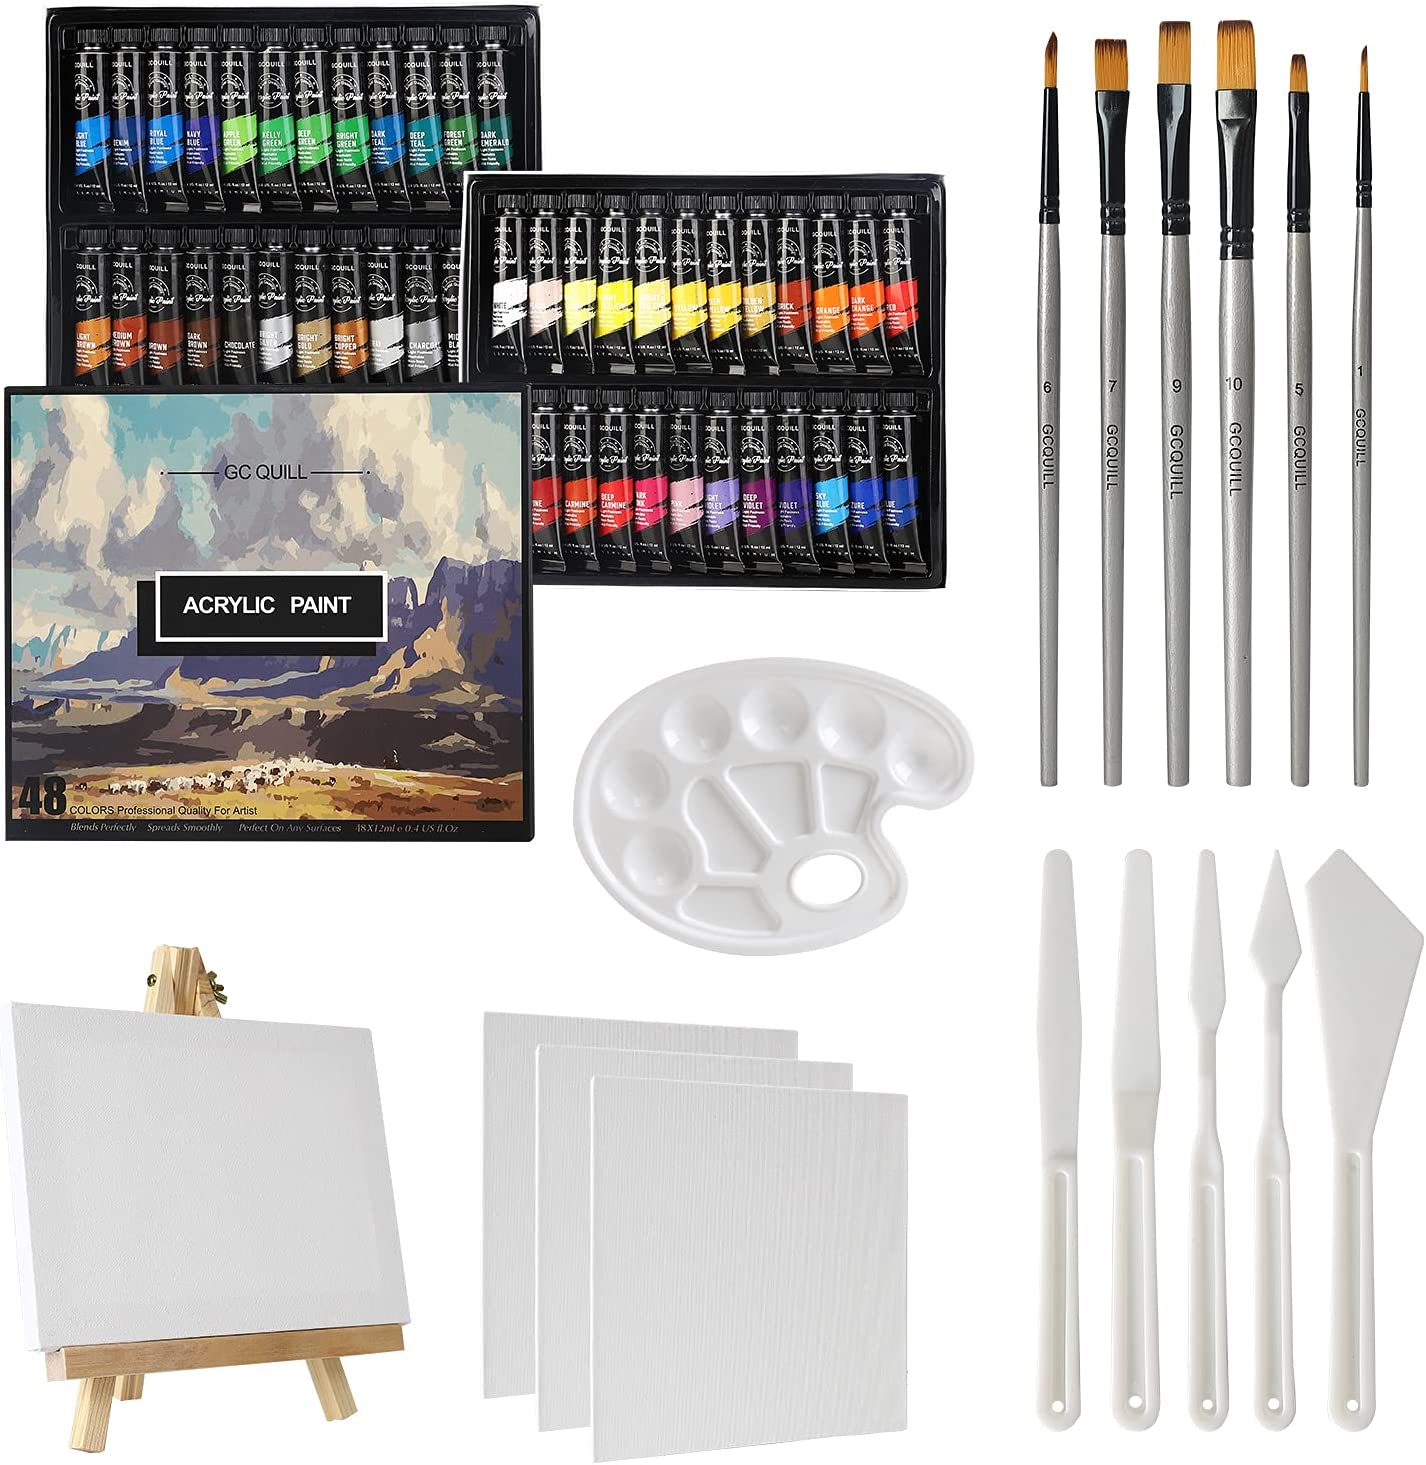 Acrylic Paint Set 12 Colors by Crafts 4 All Perfect for Canvas, Wood, Ceramic